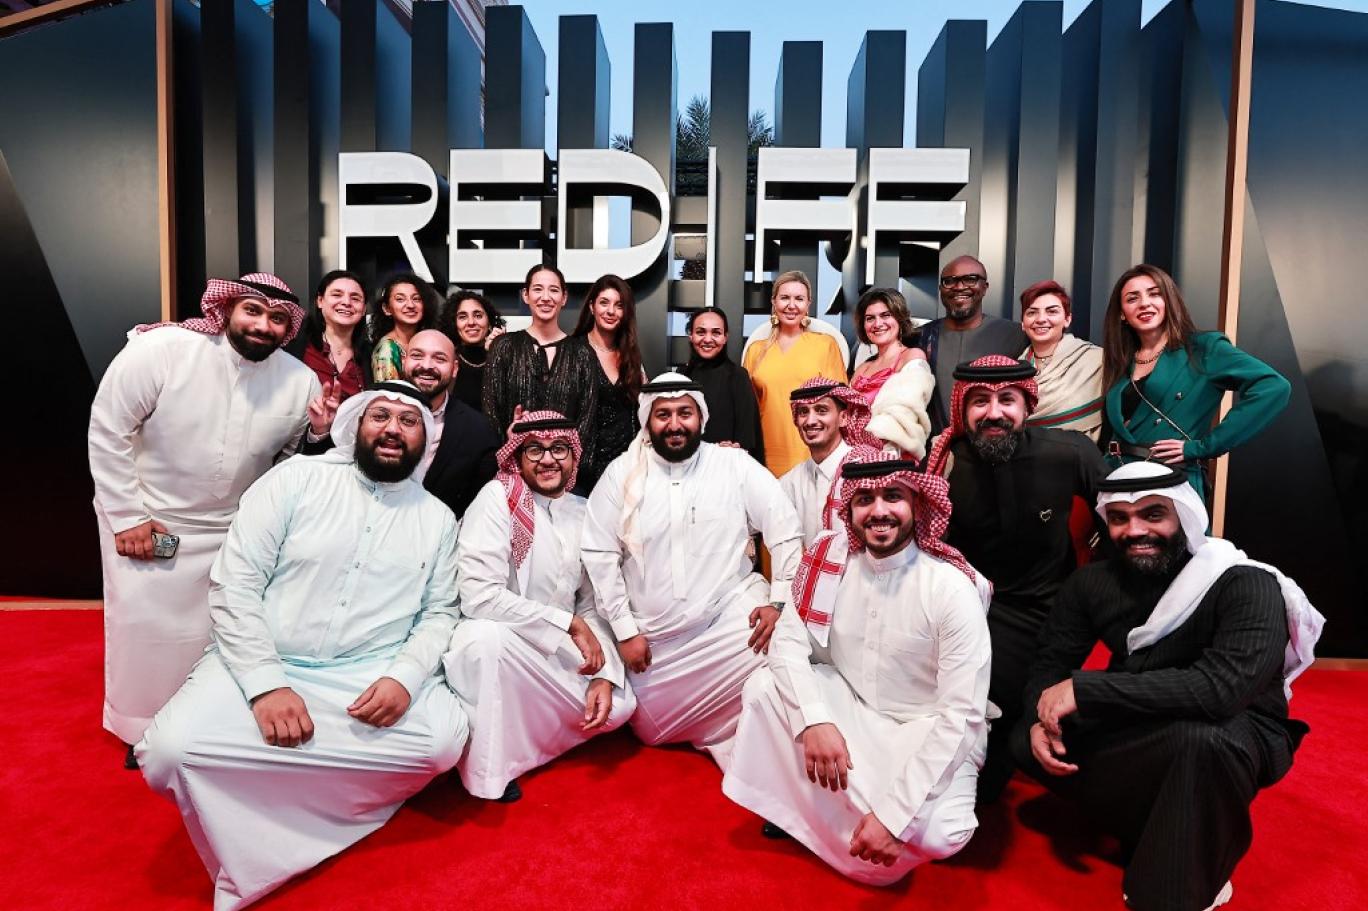 Red Sea Film Festival is getting ready to open its much-awaited fourth session in the centre of historic Jeddah.